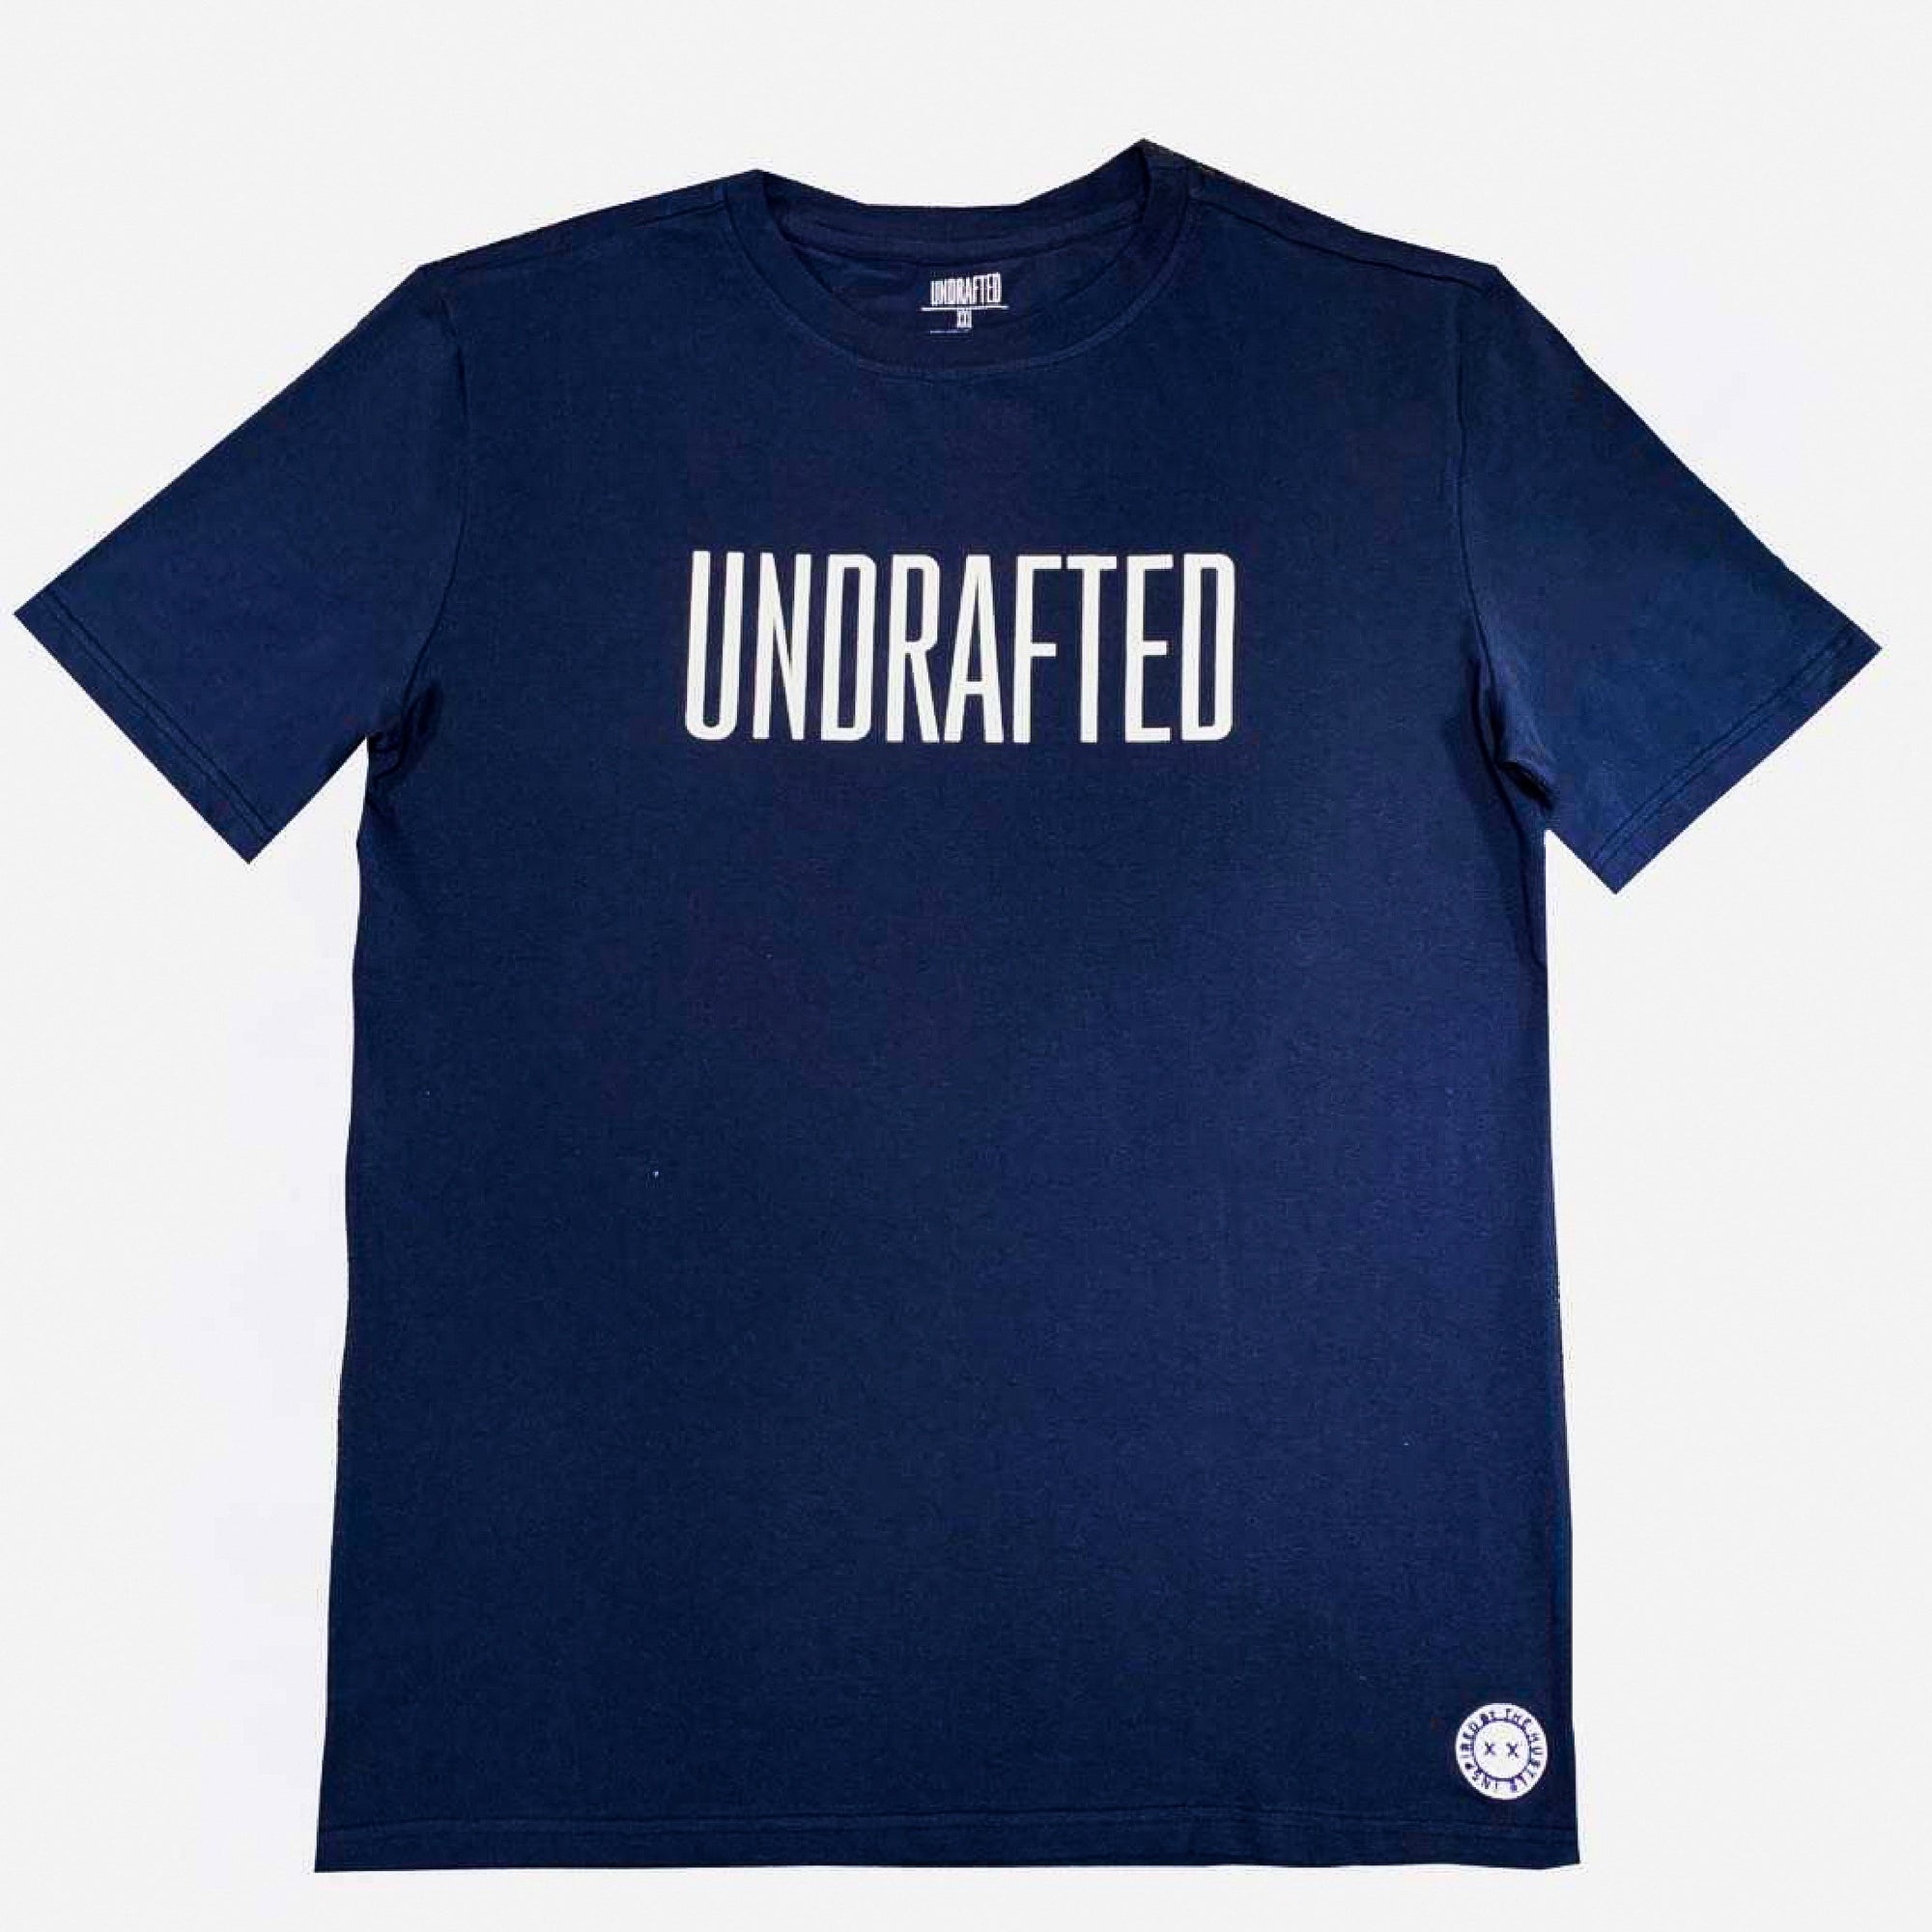 Undrafted T-Shirt Navy Blue/White